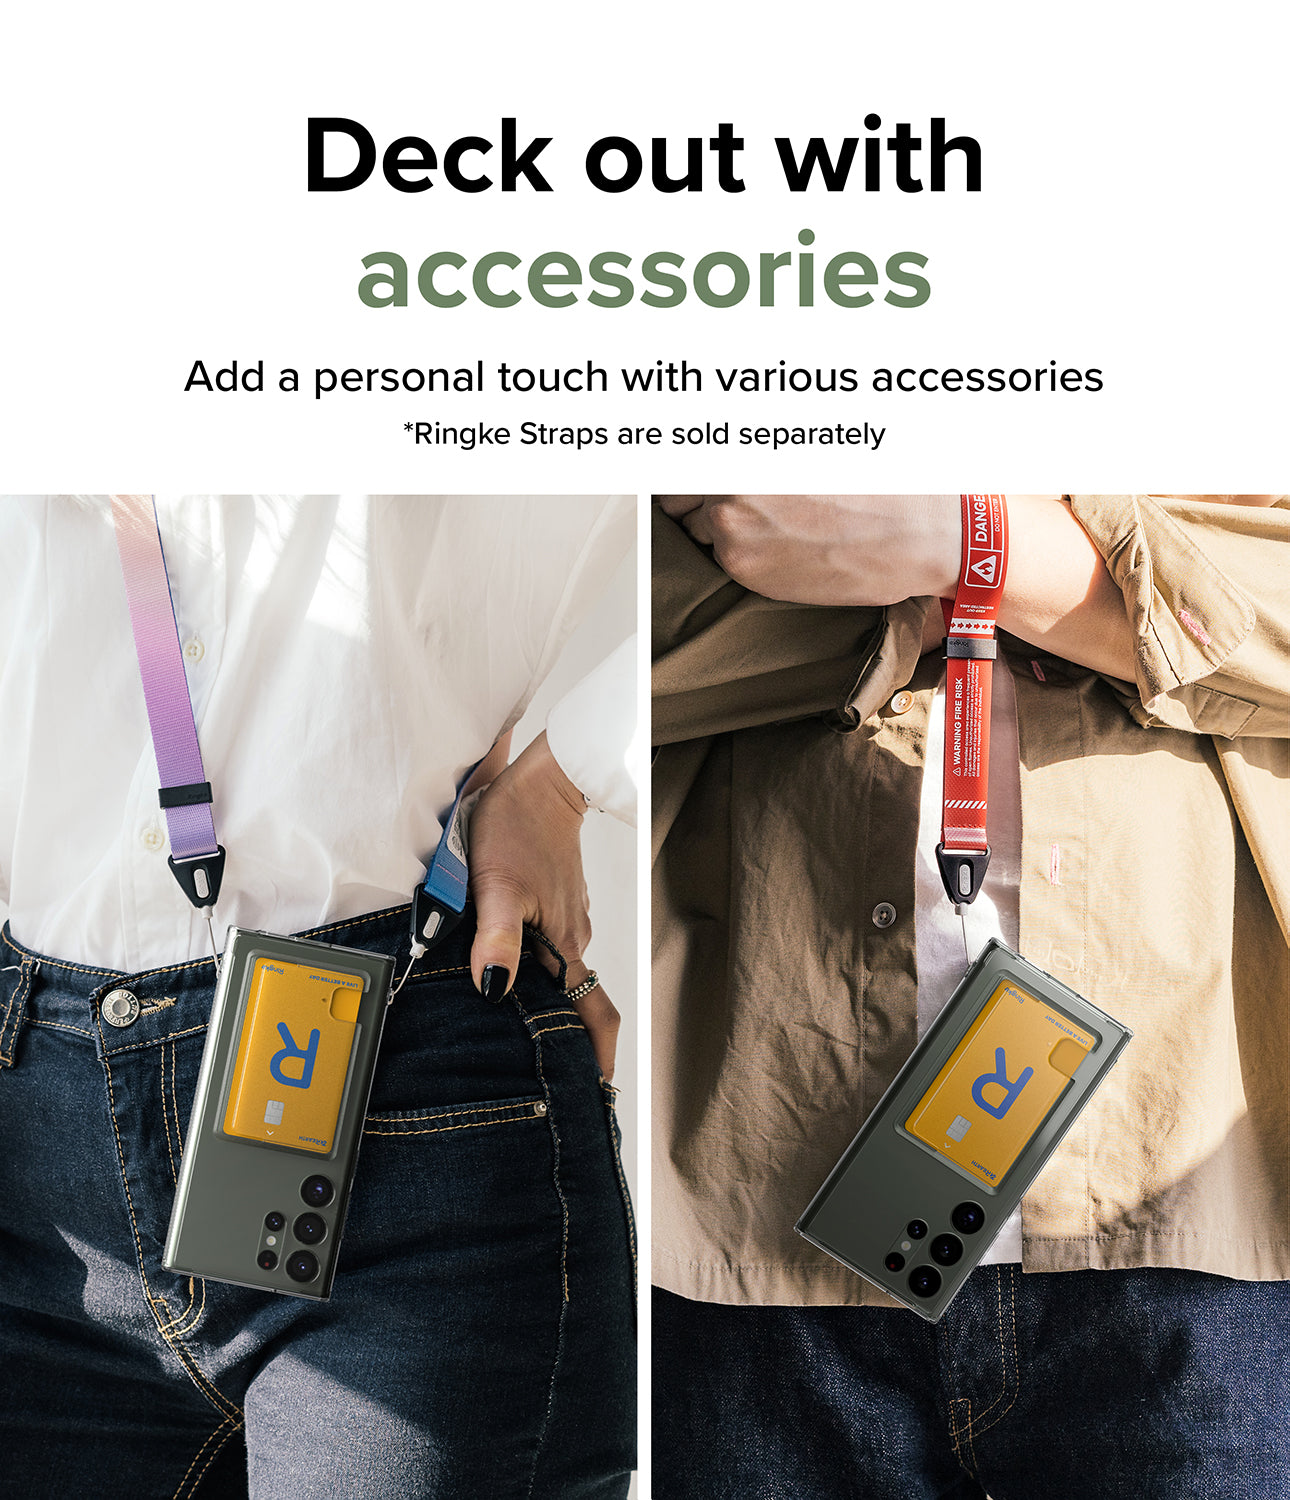 Deck out with accessories l Add a personal touch with various accessories. * Design straps are sold separately.